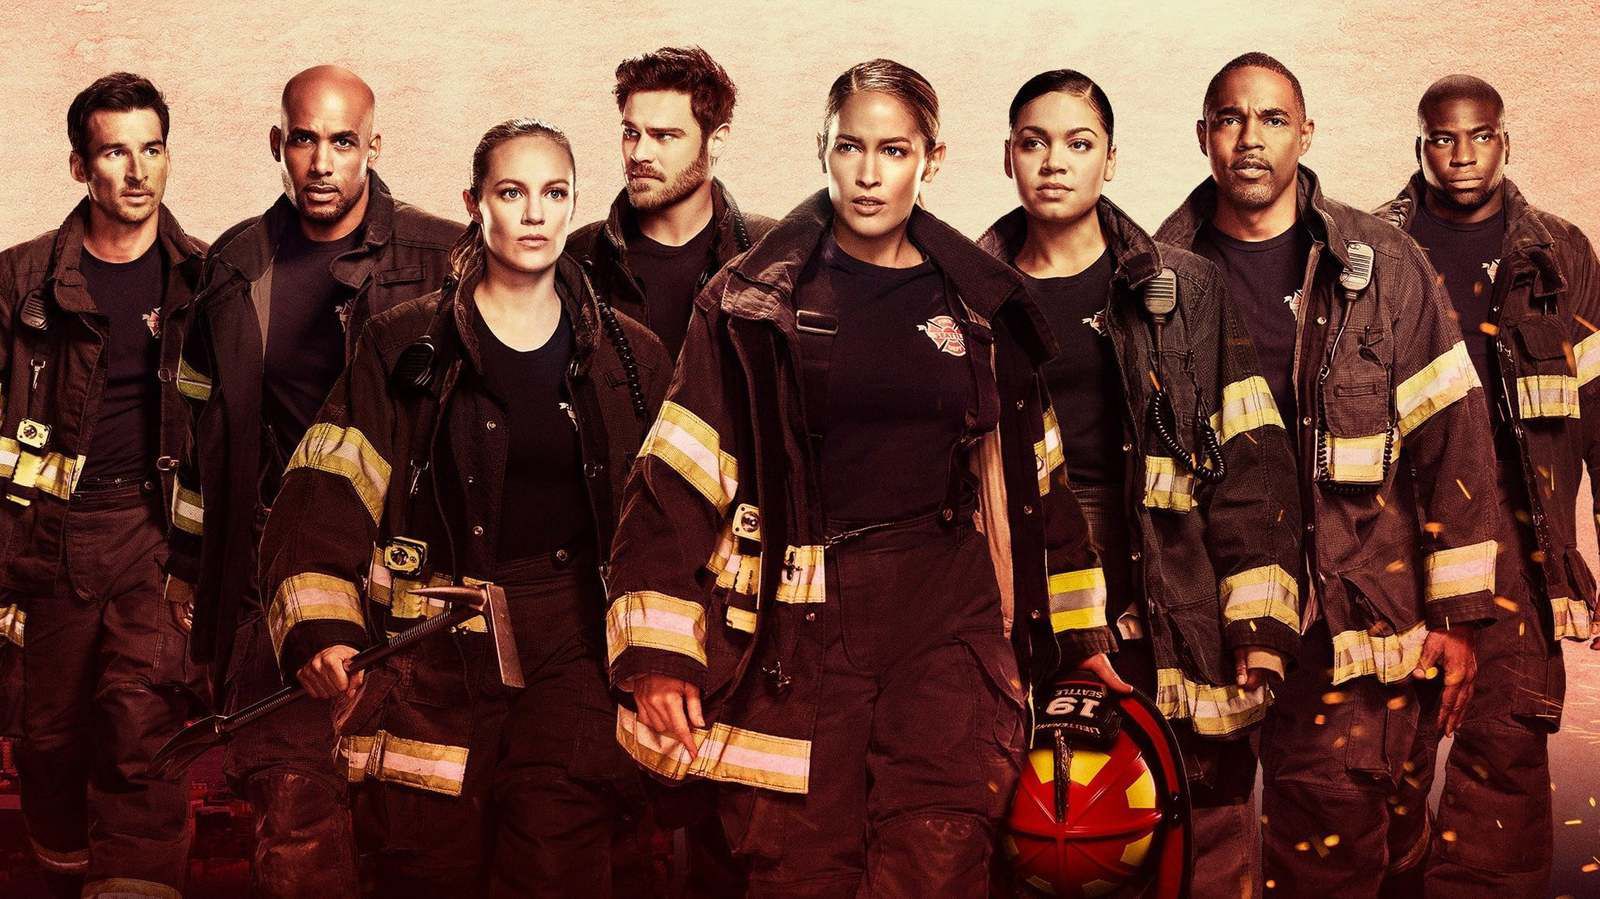 Station 19 Season 4 Renewed? Everything The Fans Should Know